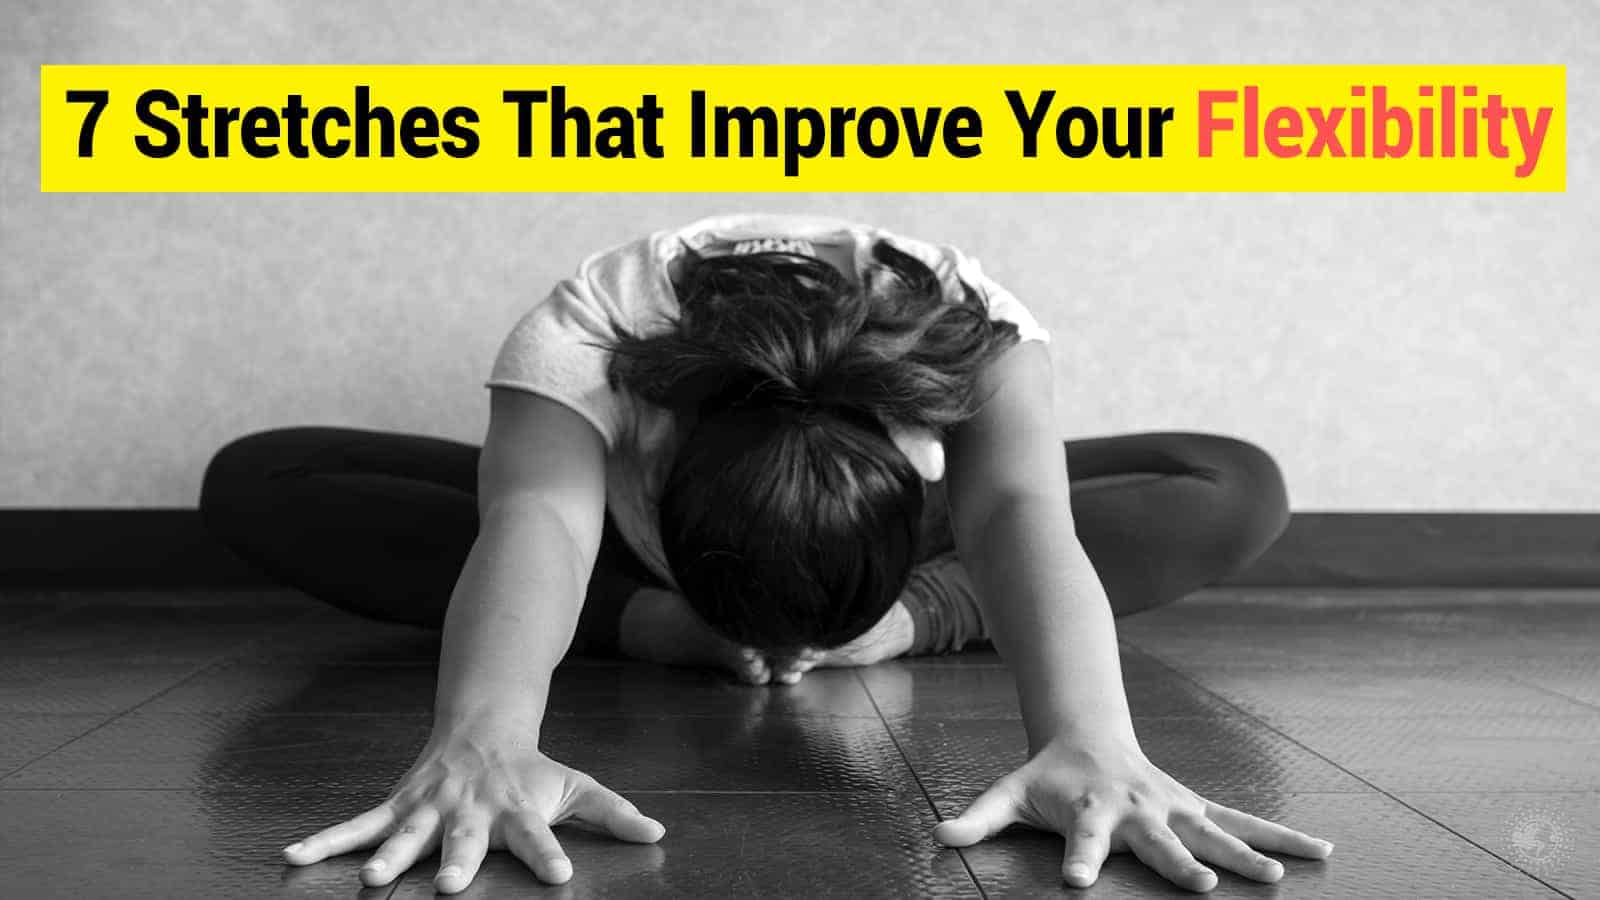  7 Stretches That Improve Your Flexibility